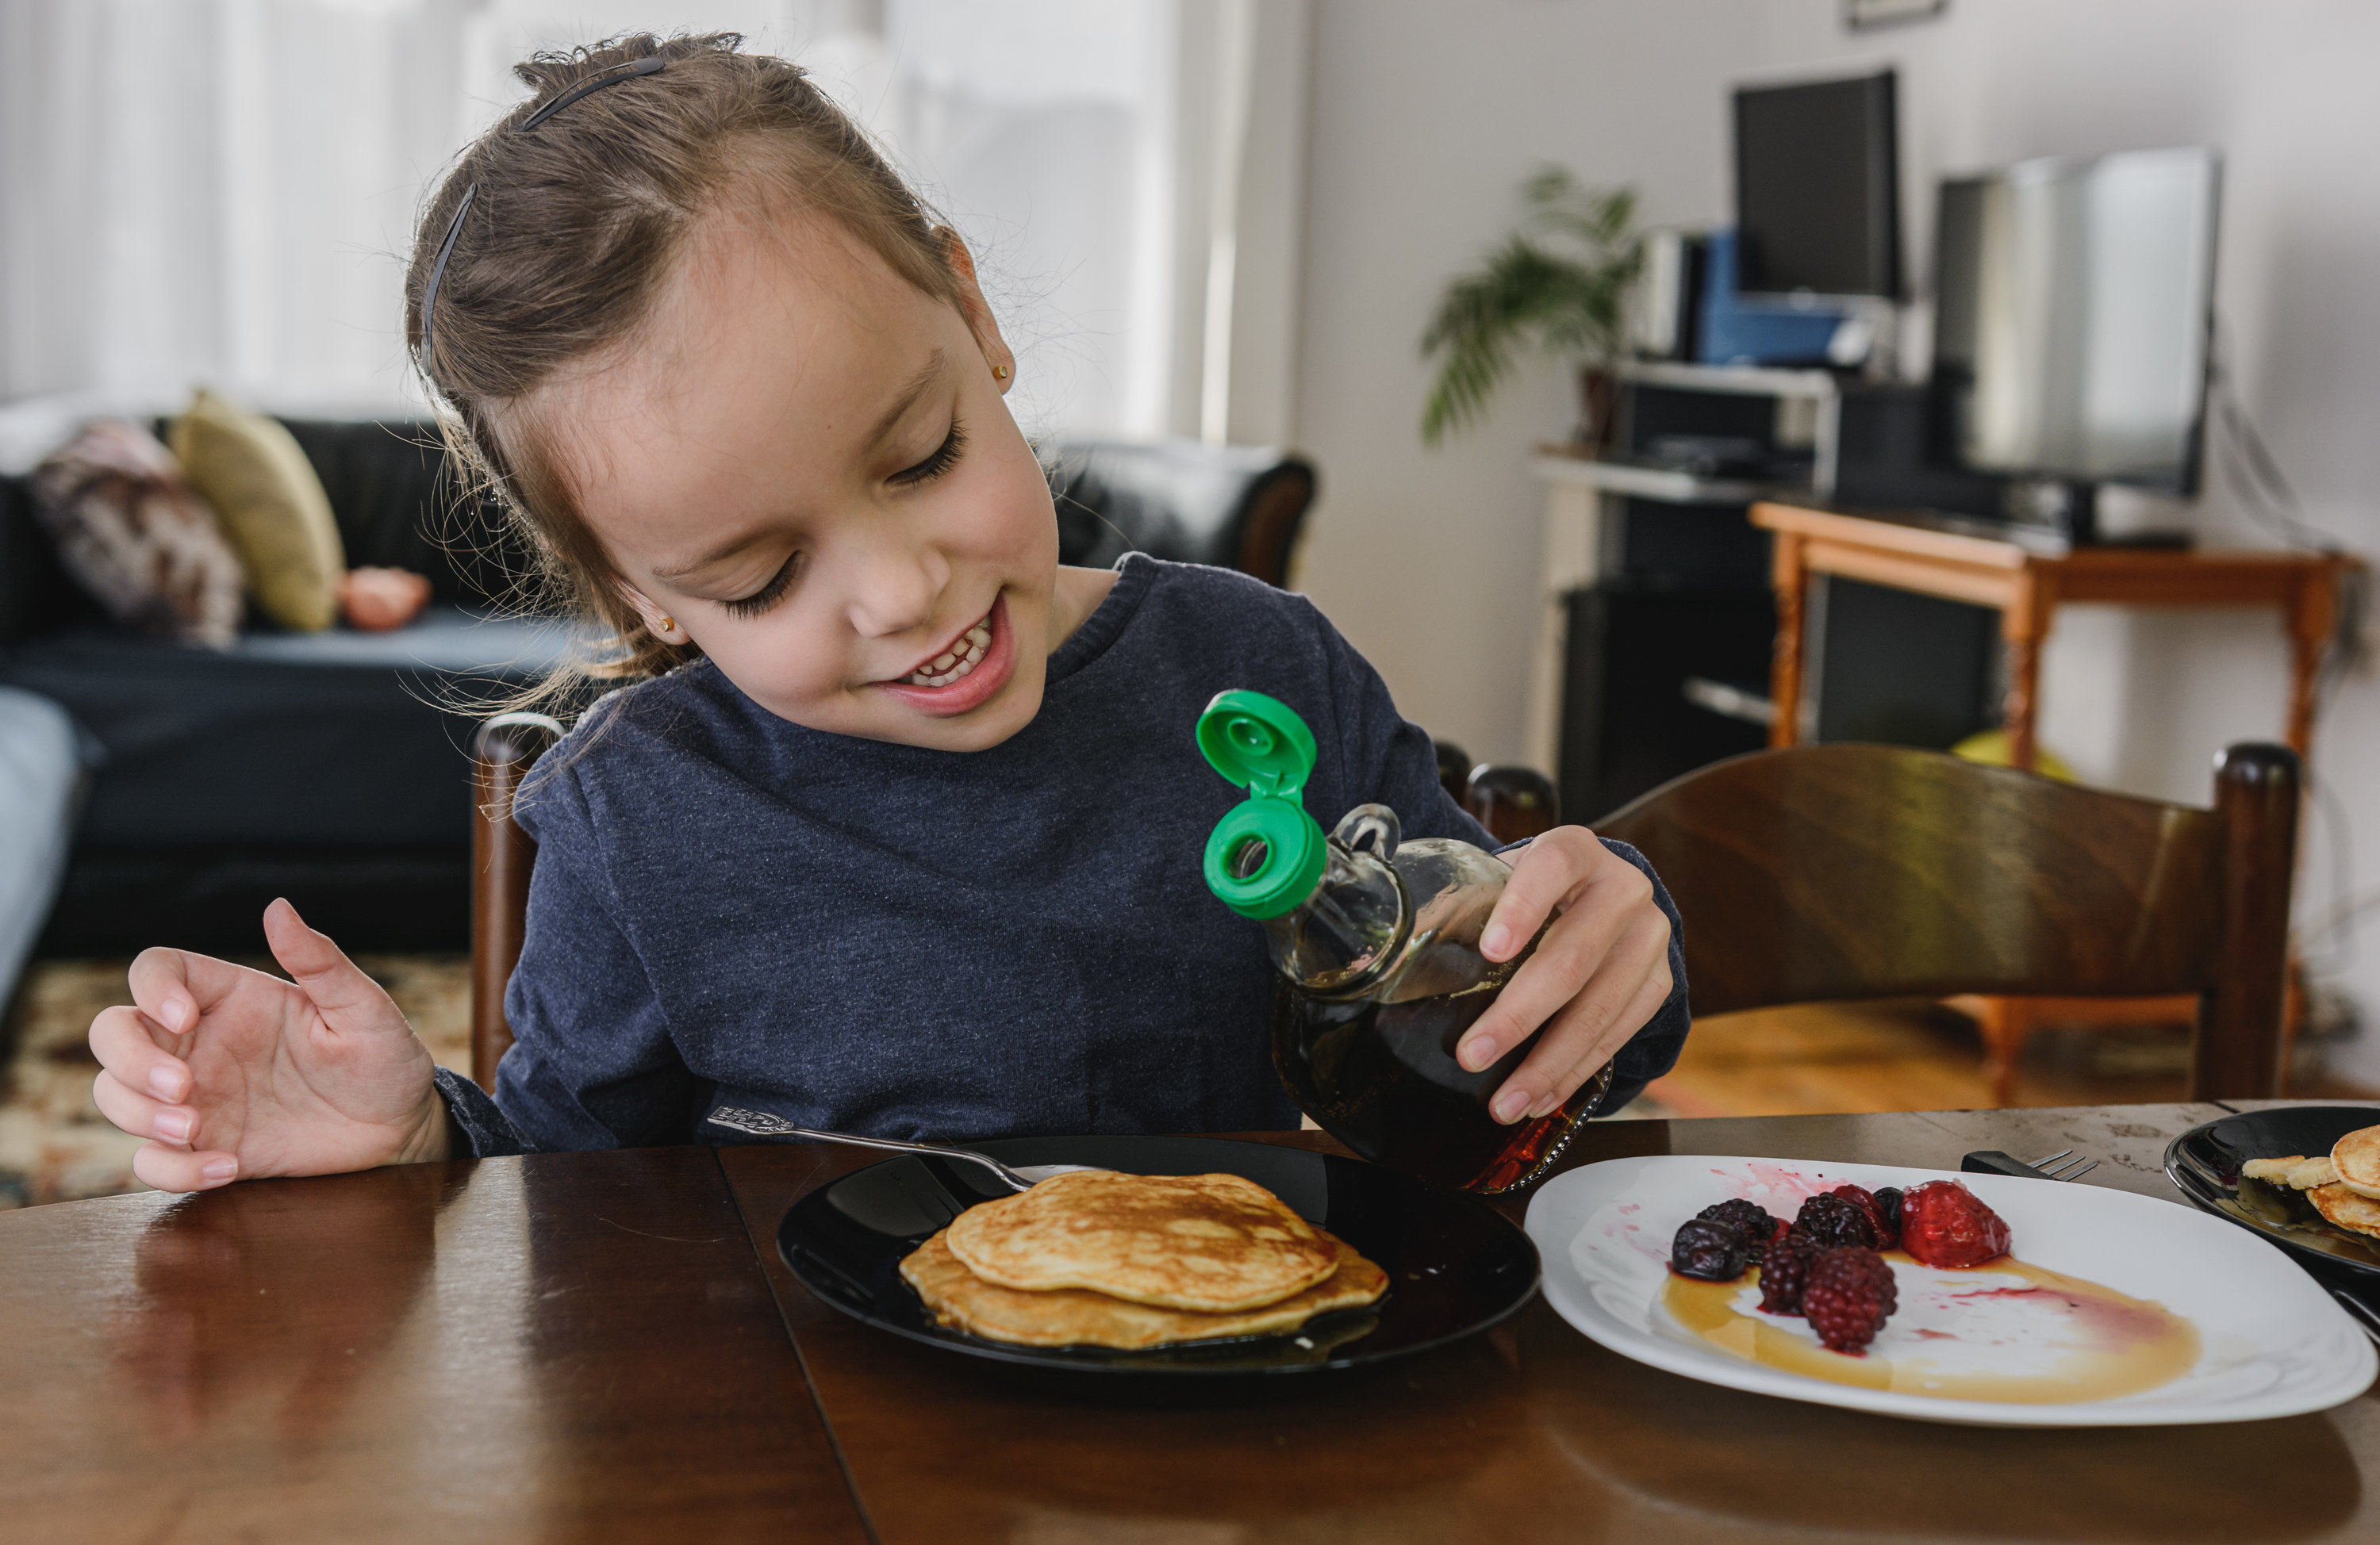 Child drizzling syrup over pancakes on a plate